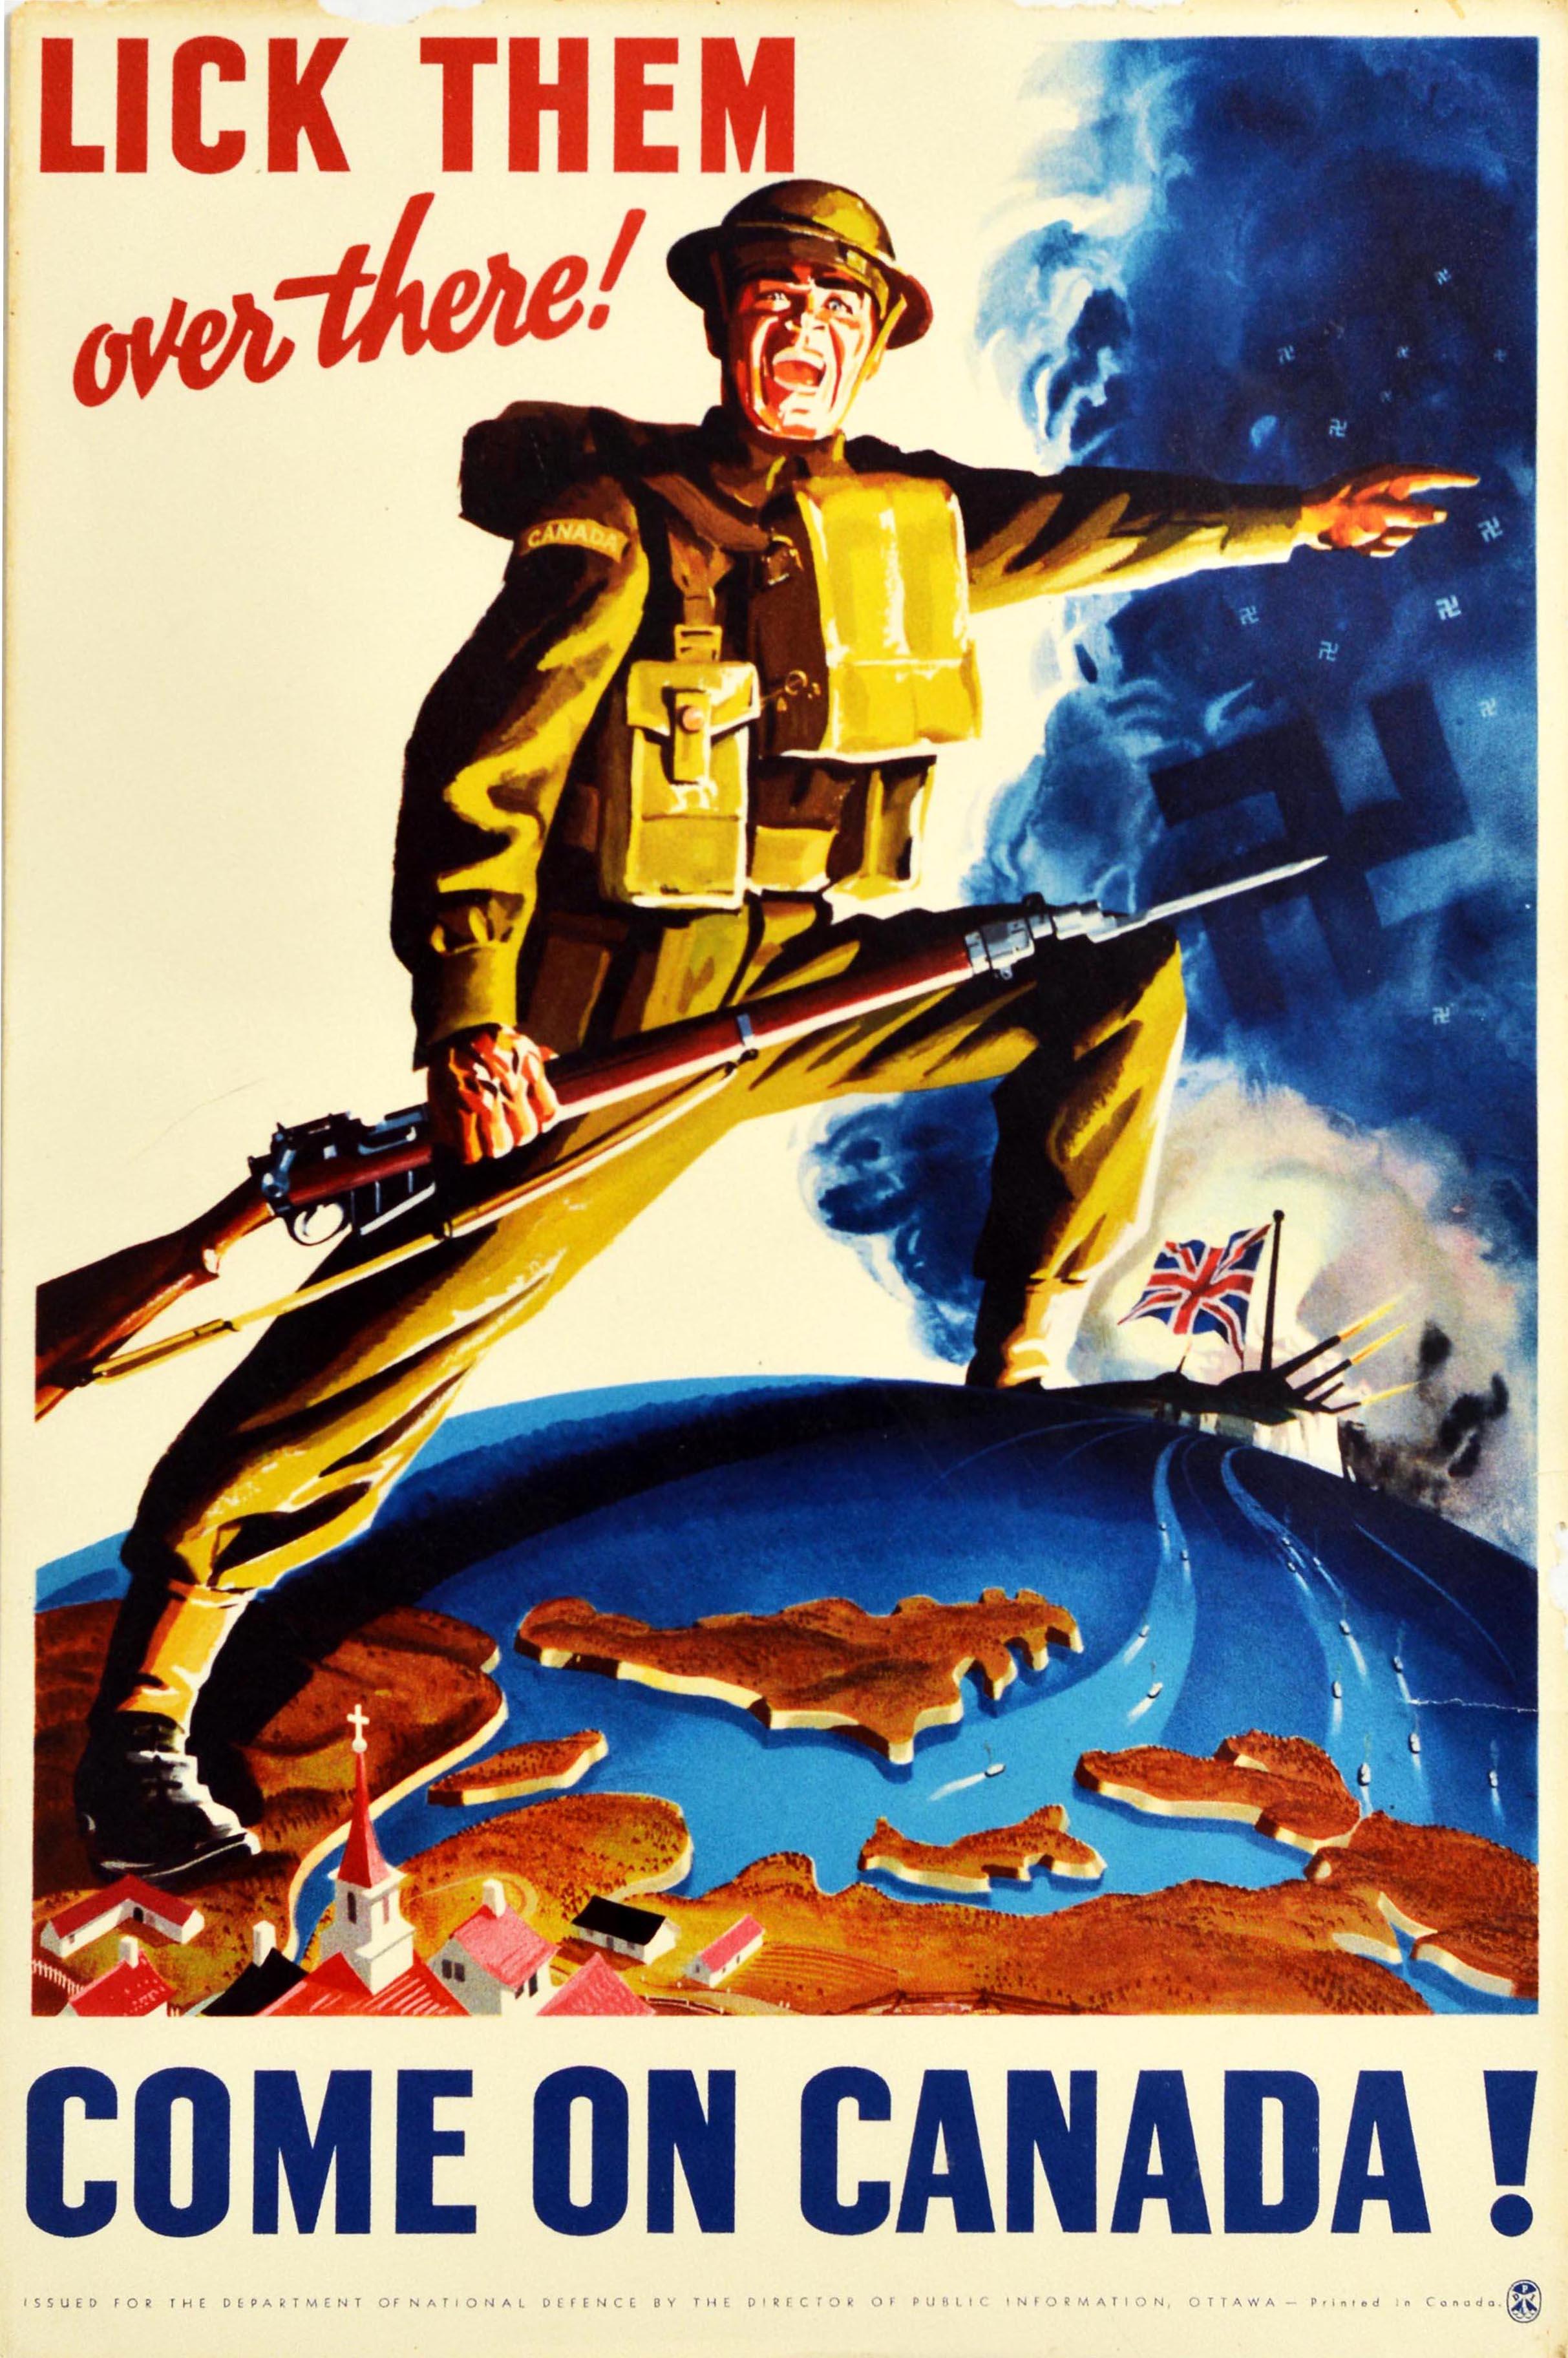 Unknown Print - Original Vintage World War Two Poster Lick Them Over There WWII Canada Soldier